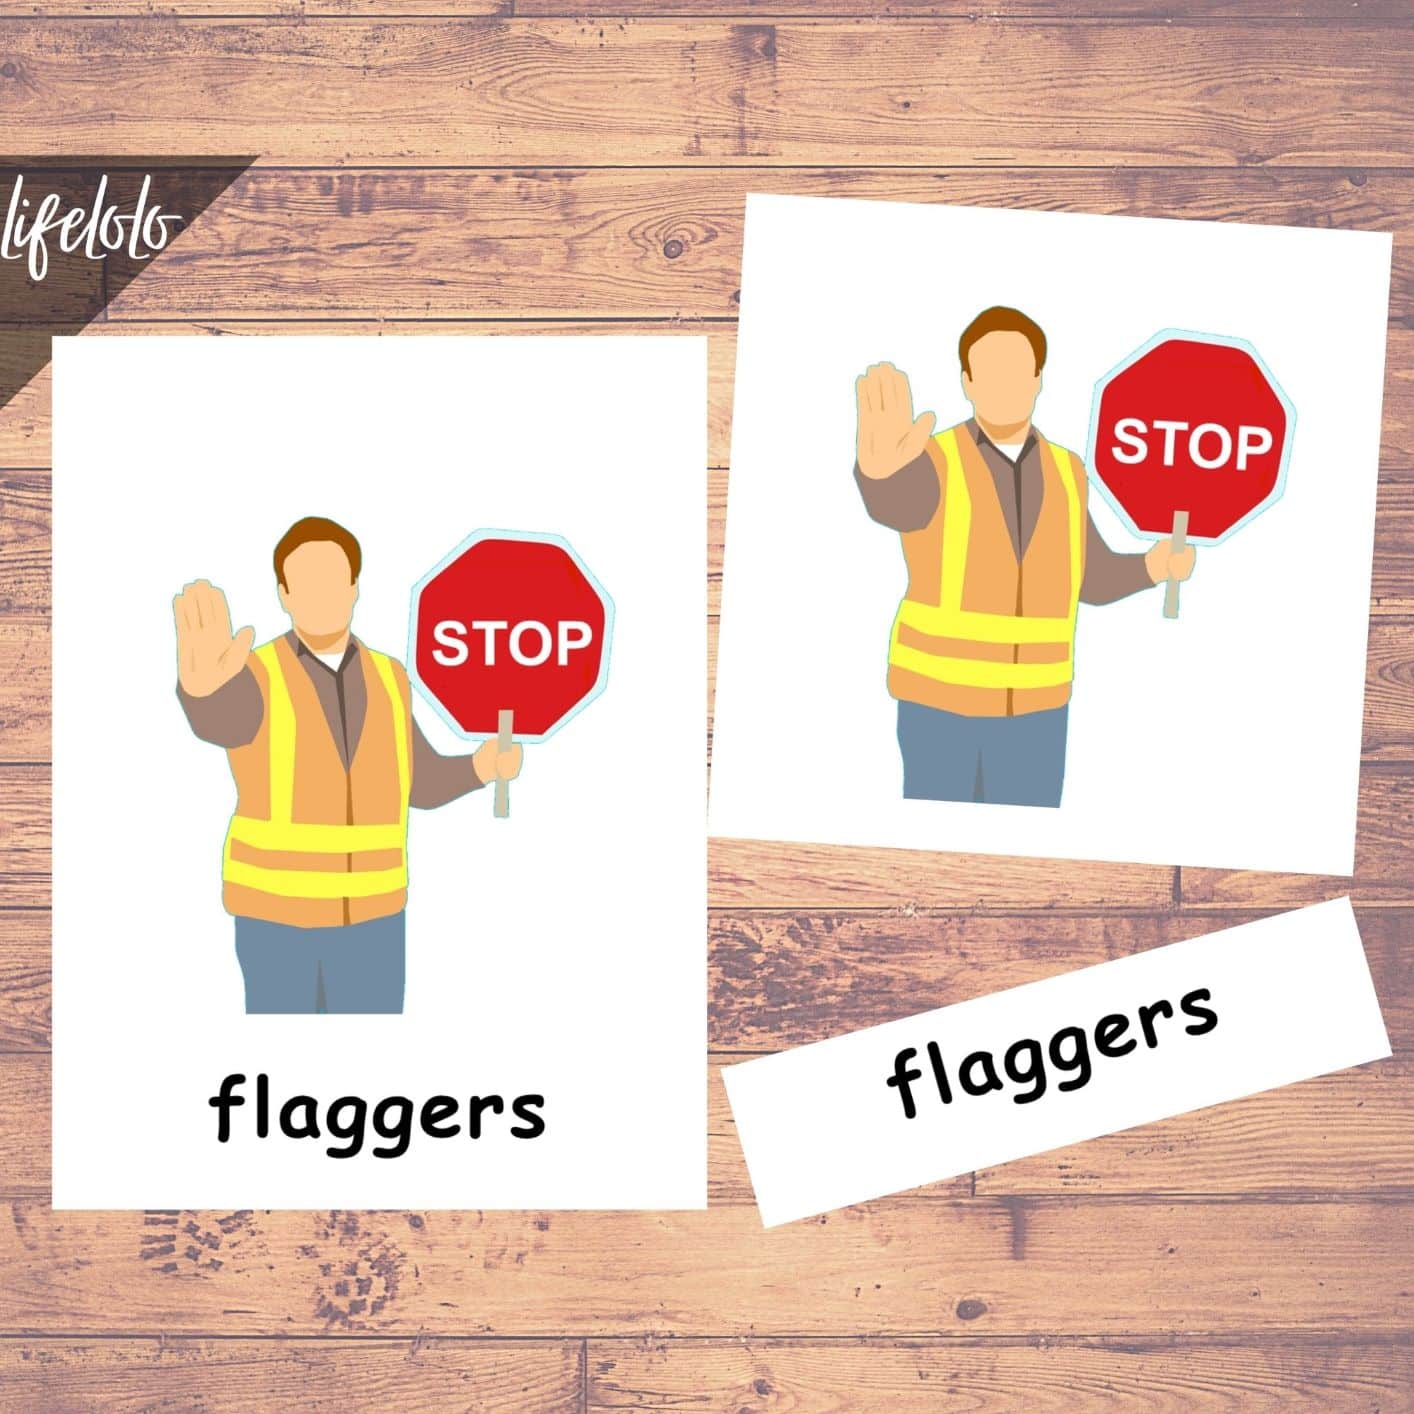 USA Traffic Signs, Road Signs Test Flash Cards, DMV Permit Practice